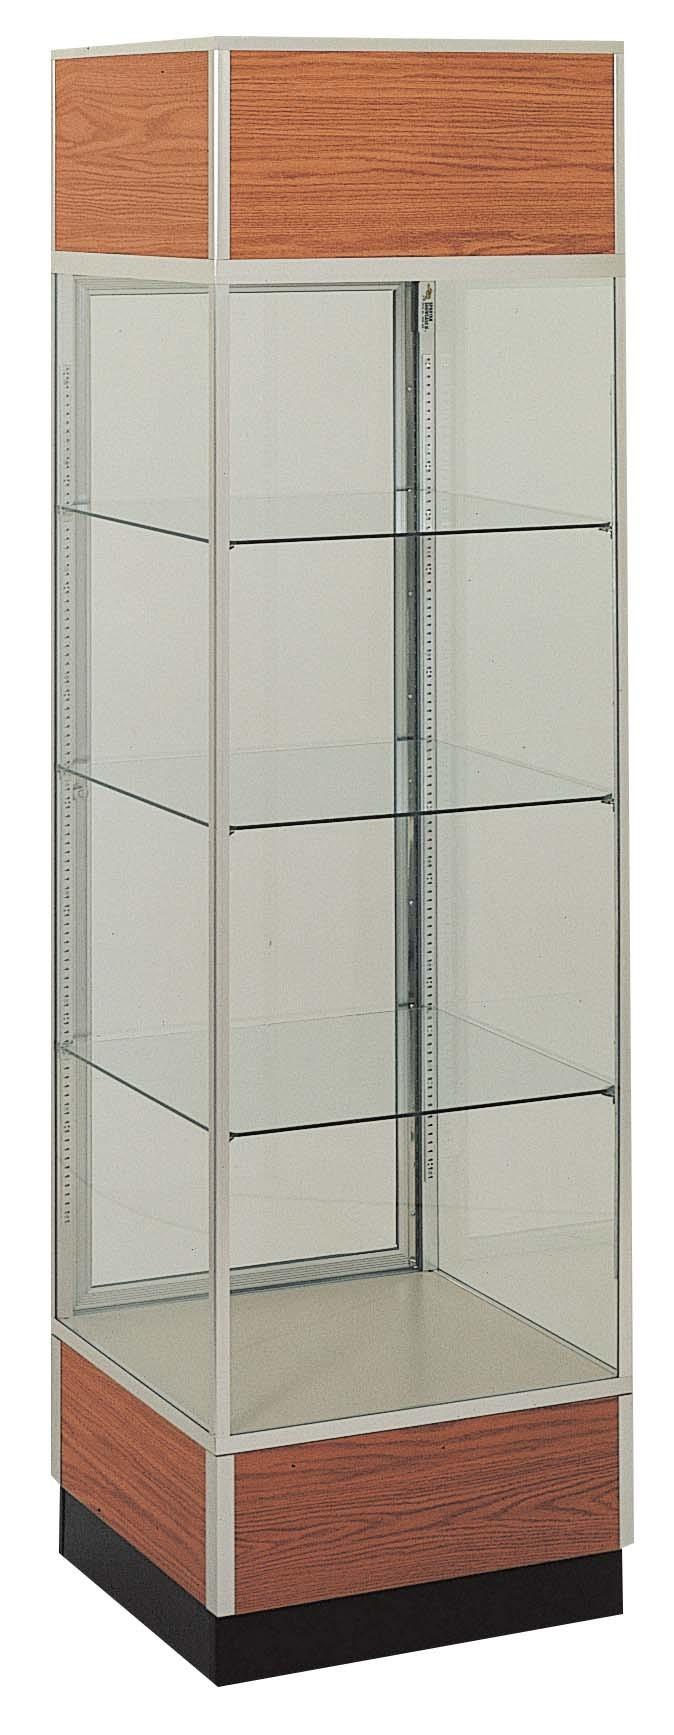 F-Series Square Tower Showcases SQ-72 DSQ-80 Standard Specifications Anodized Silver Satin Finish Aluminum Frame & Trim